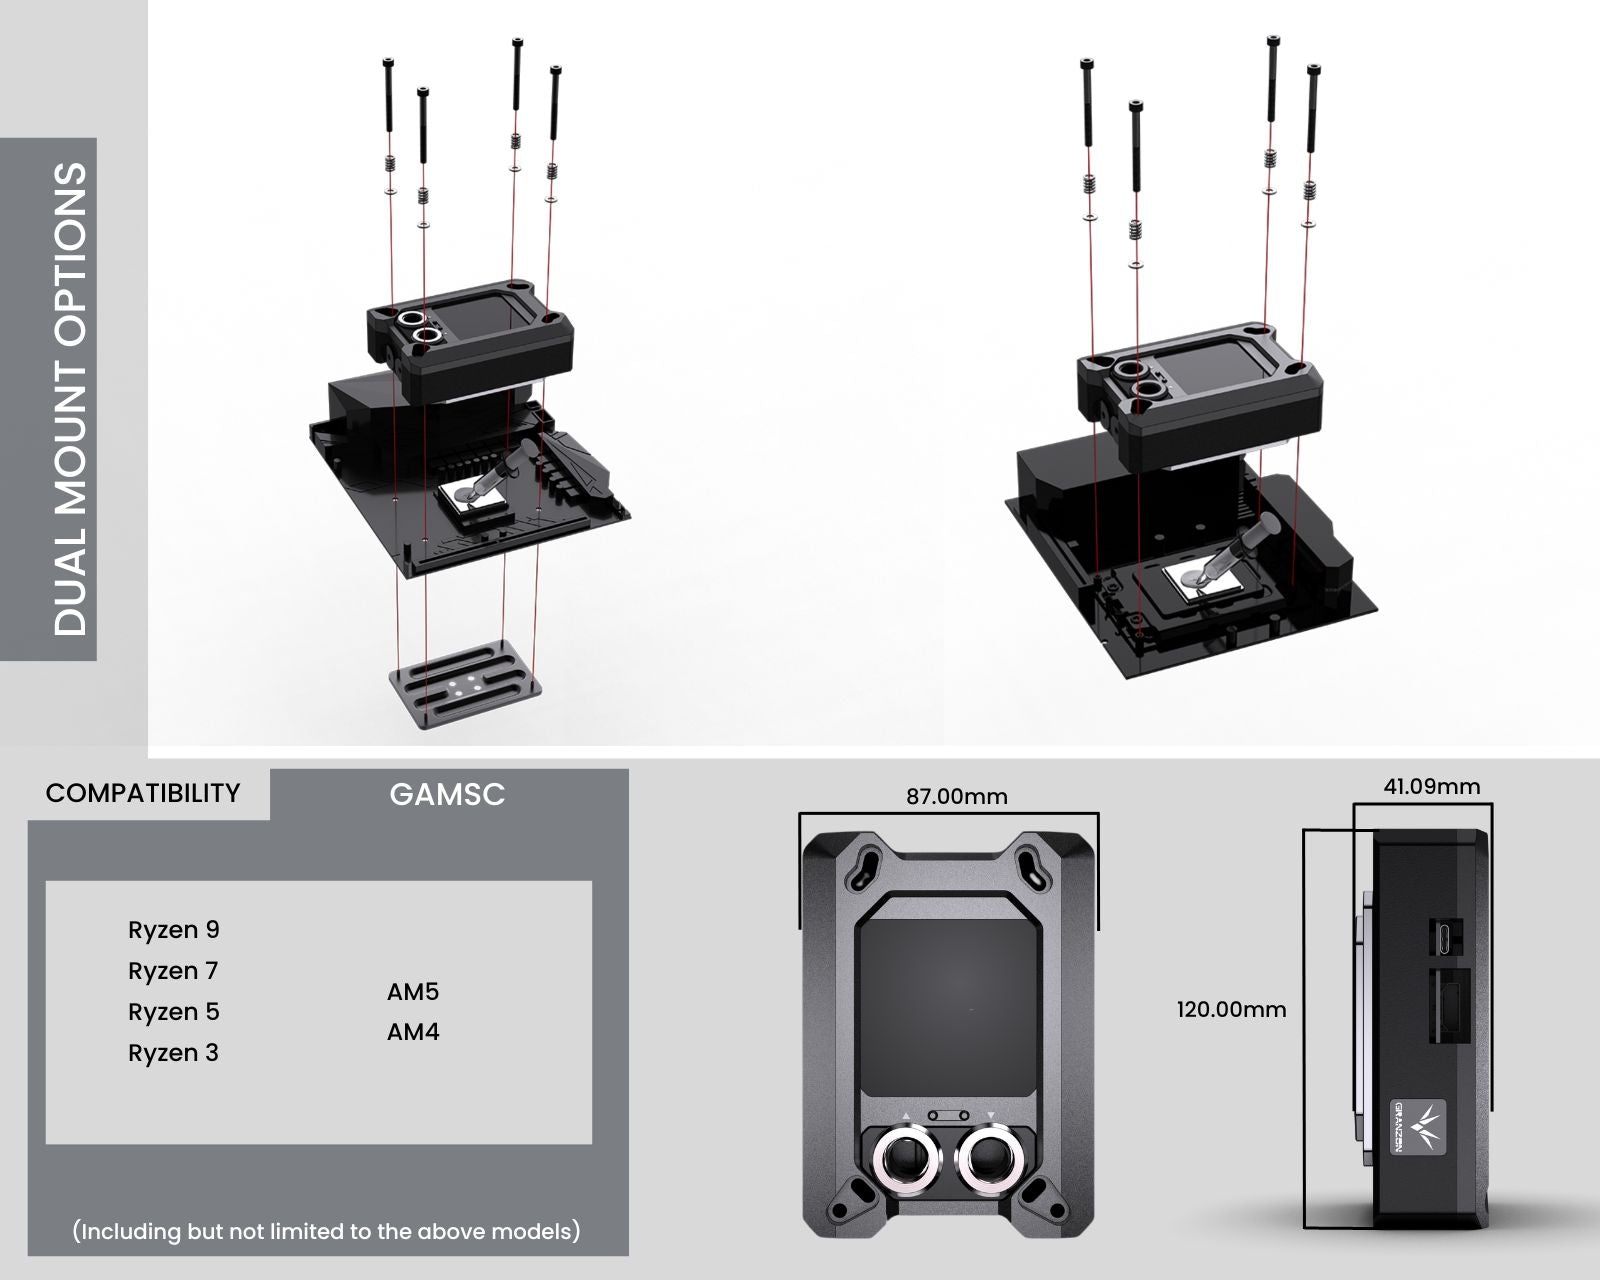 A large marketing image providing additional information about the product Bykski Granzon GAMSC Digital AMD CPU Waterblock - Additional alt info not provided